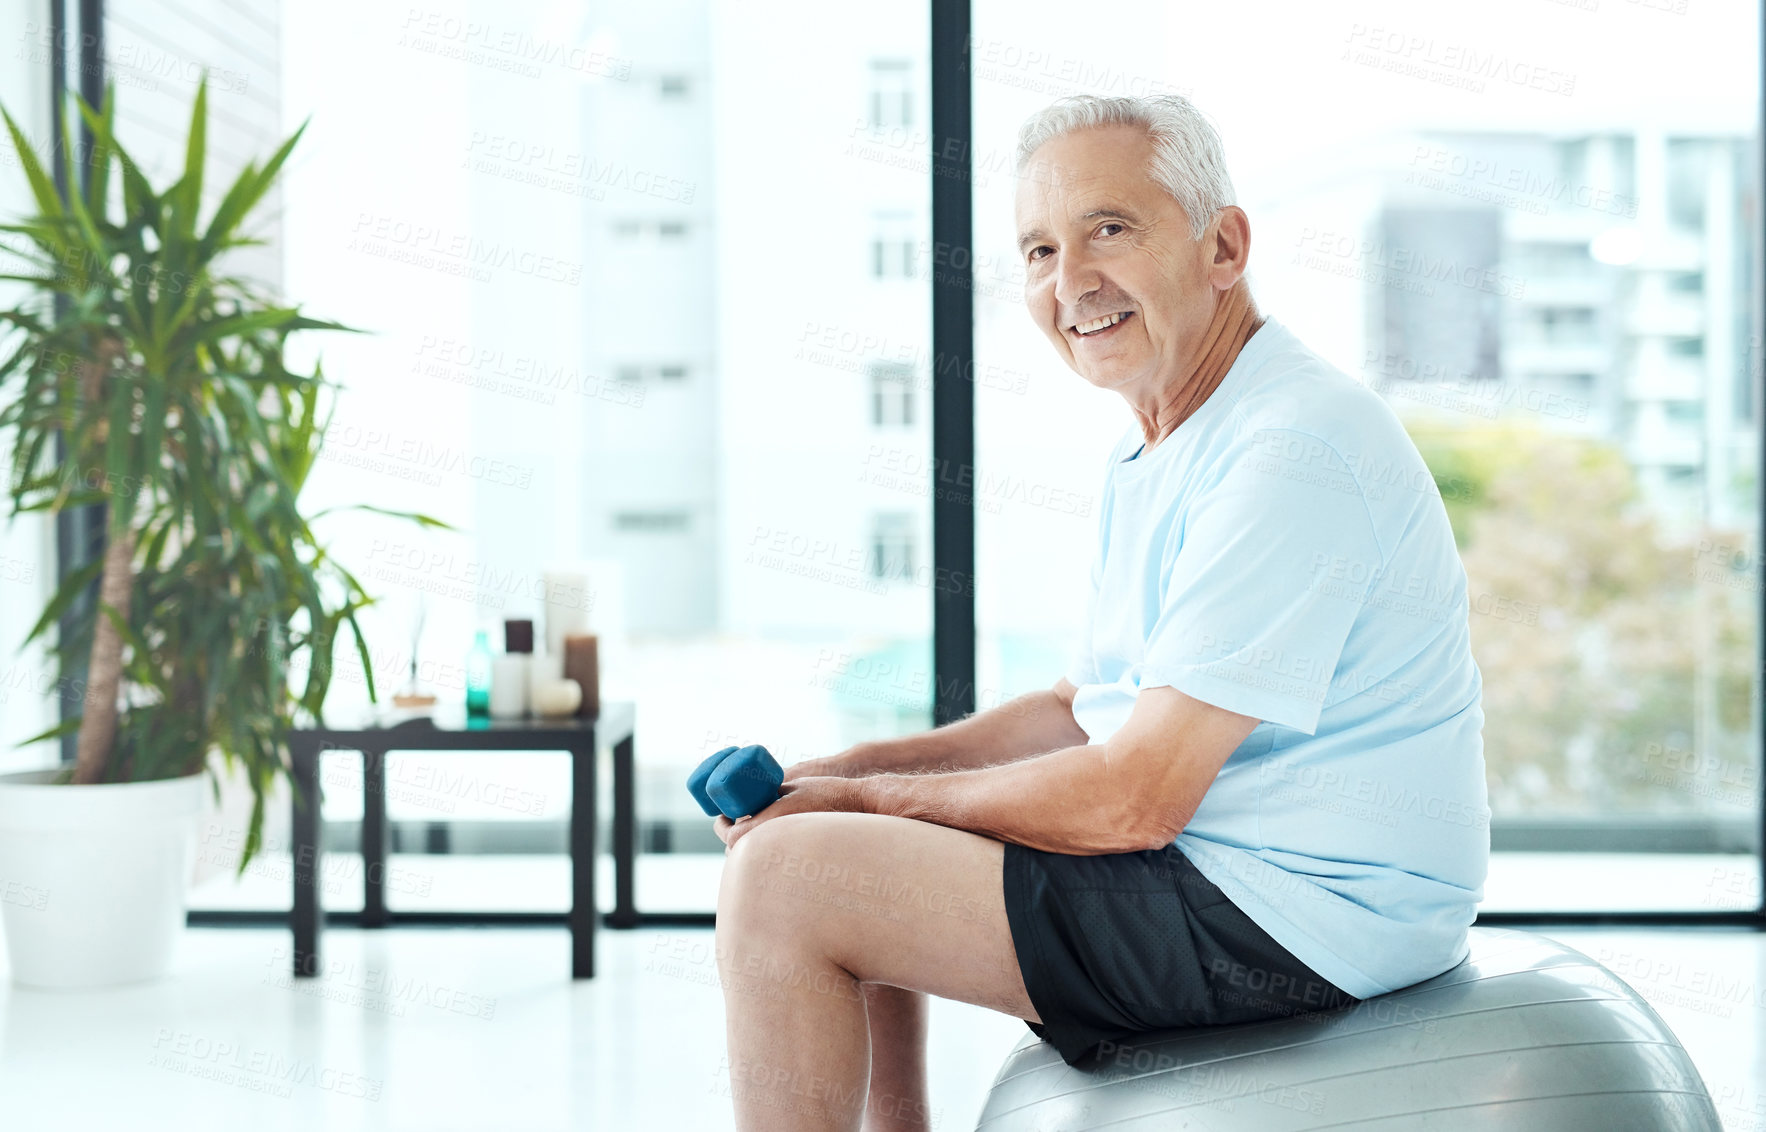 Buy stock photo Shot of a senior man working out with dumbbells